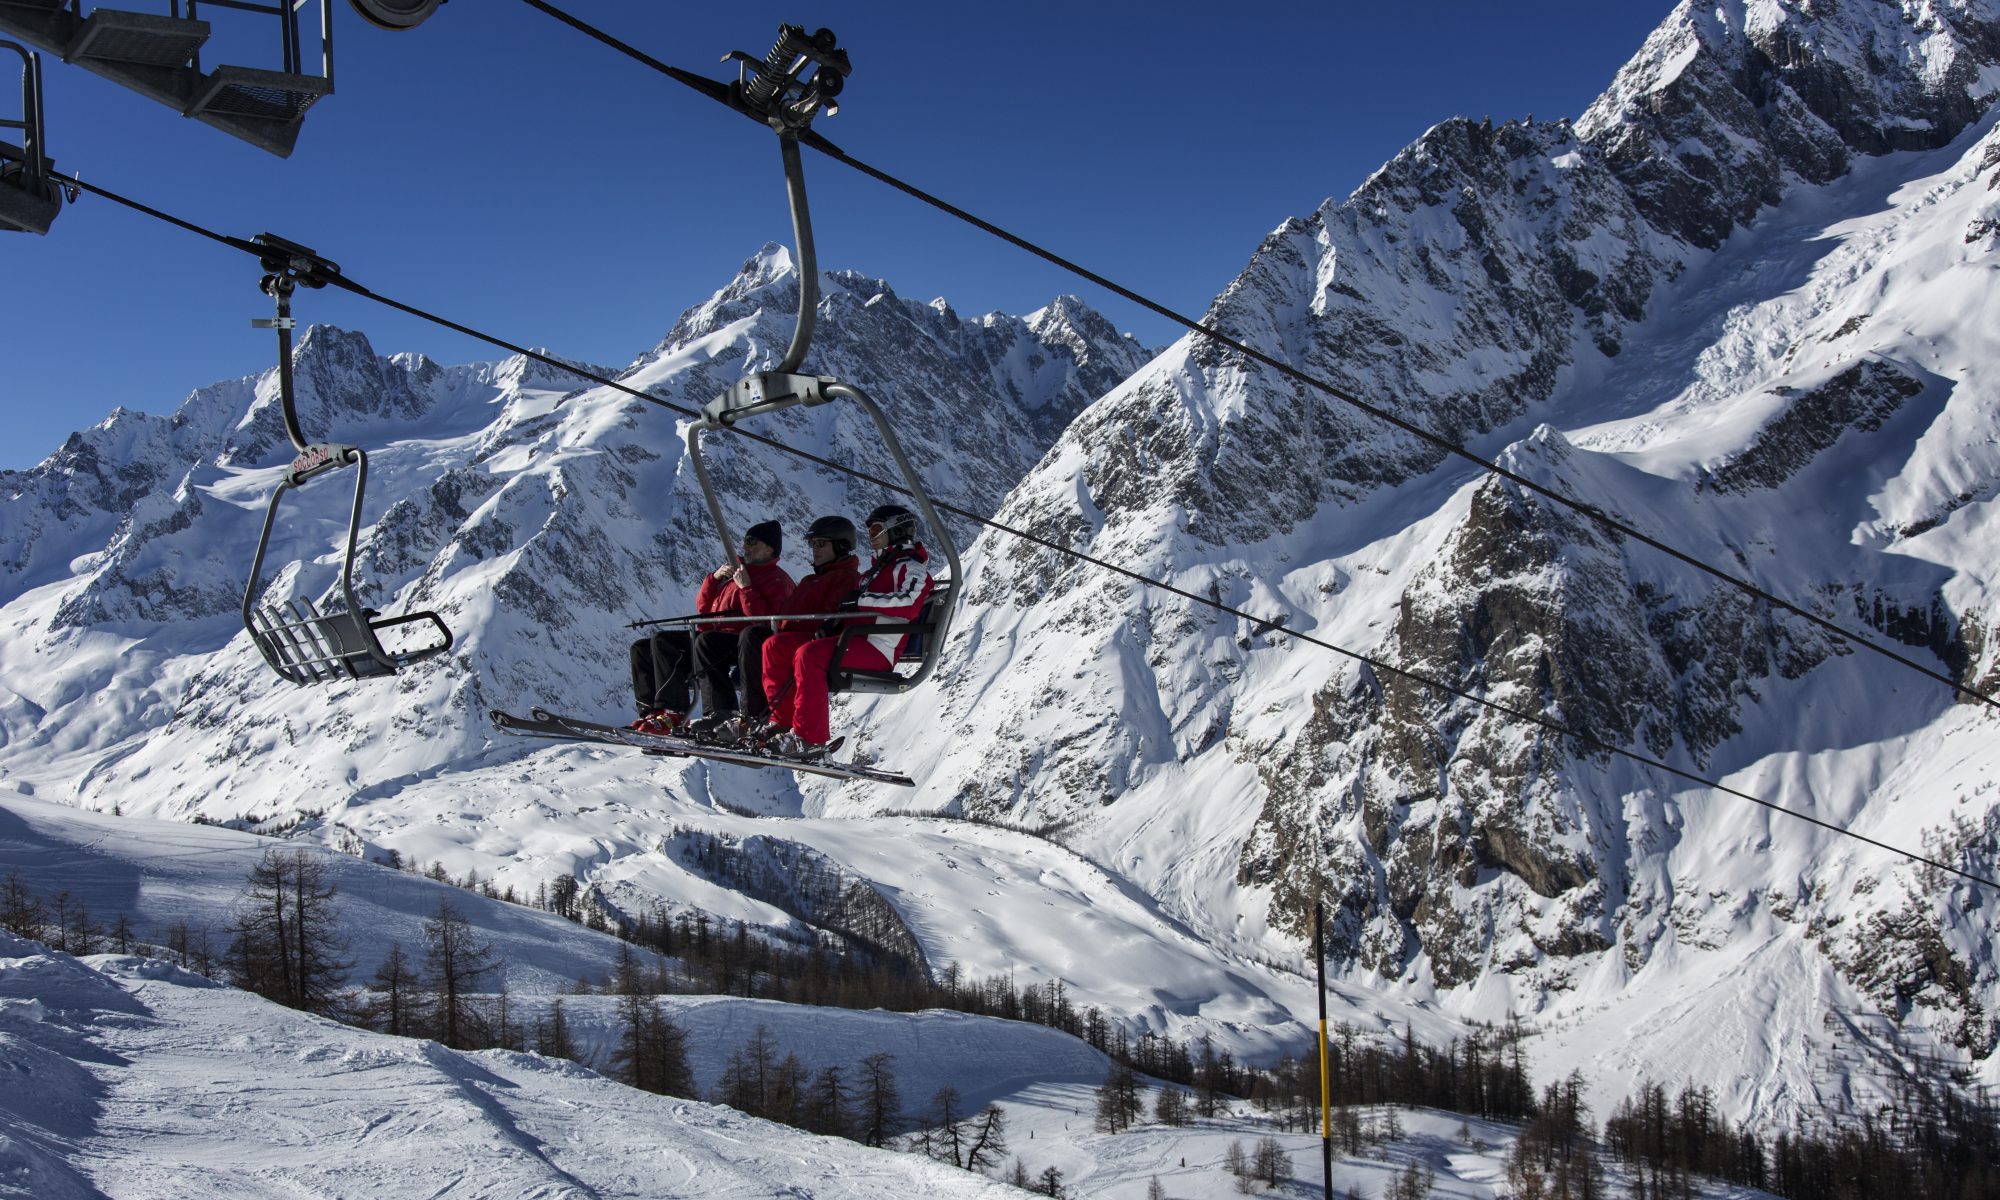 Chairlift ride up in Courmayeur Mont Blanc. Courmayeur Mont Blanc Funivie is opening two new slopes with amazing panoramic views.